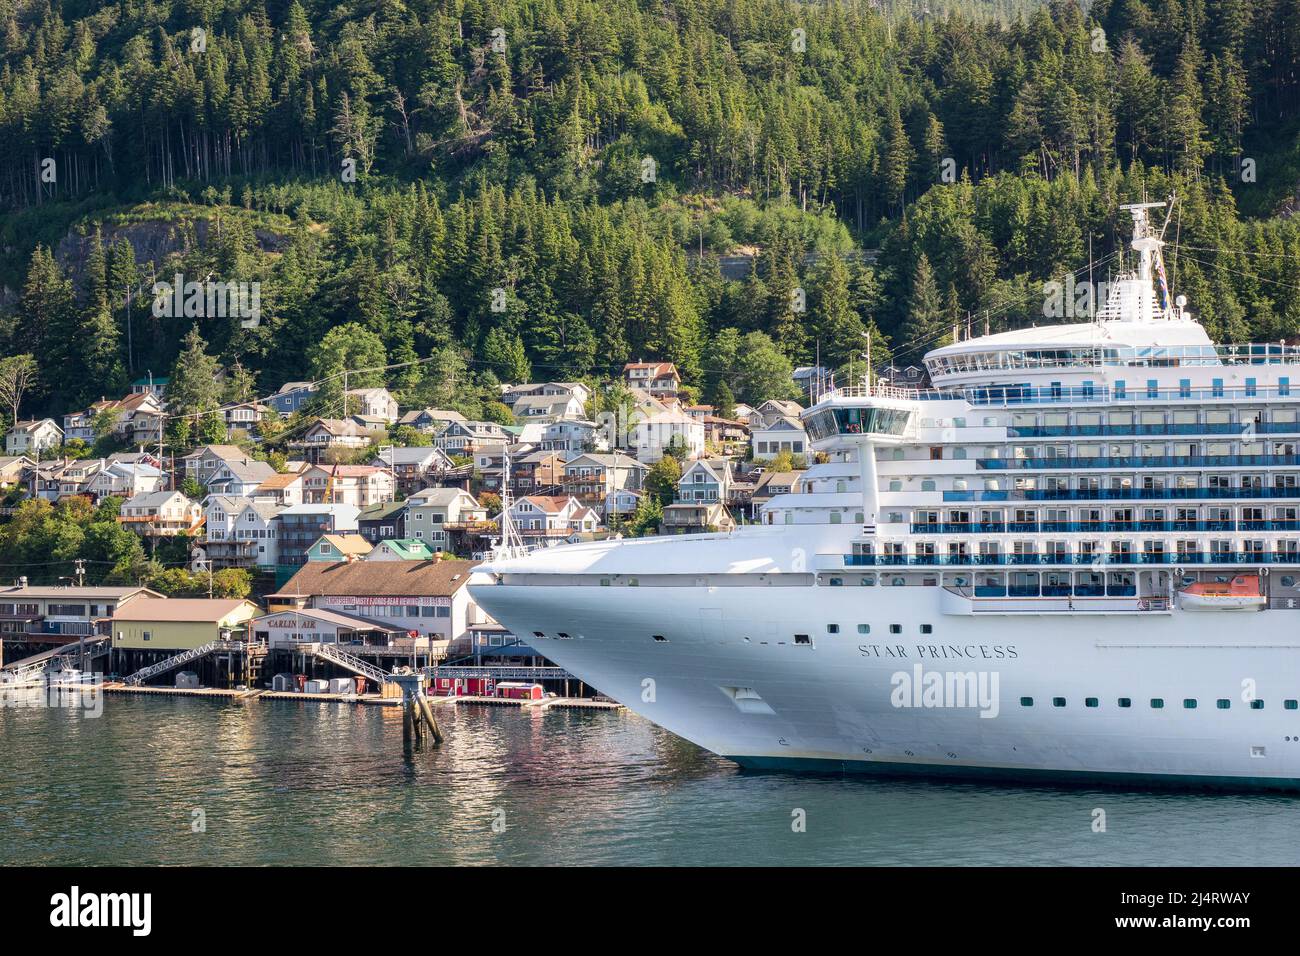 The Star Princess Cruise Ship In Port At Ketchican Alaska A Port On The Inside Passage Cruise Route Stock Photo